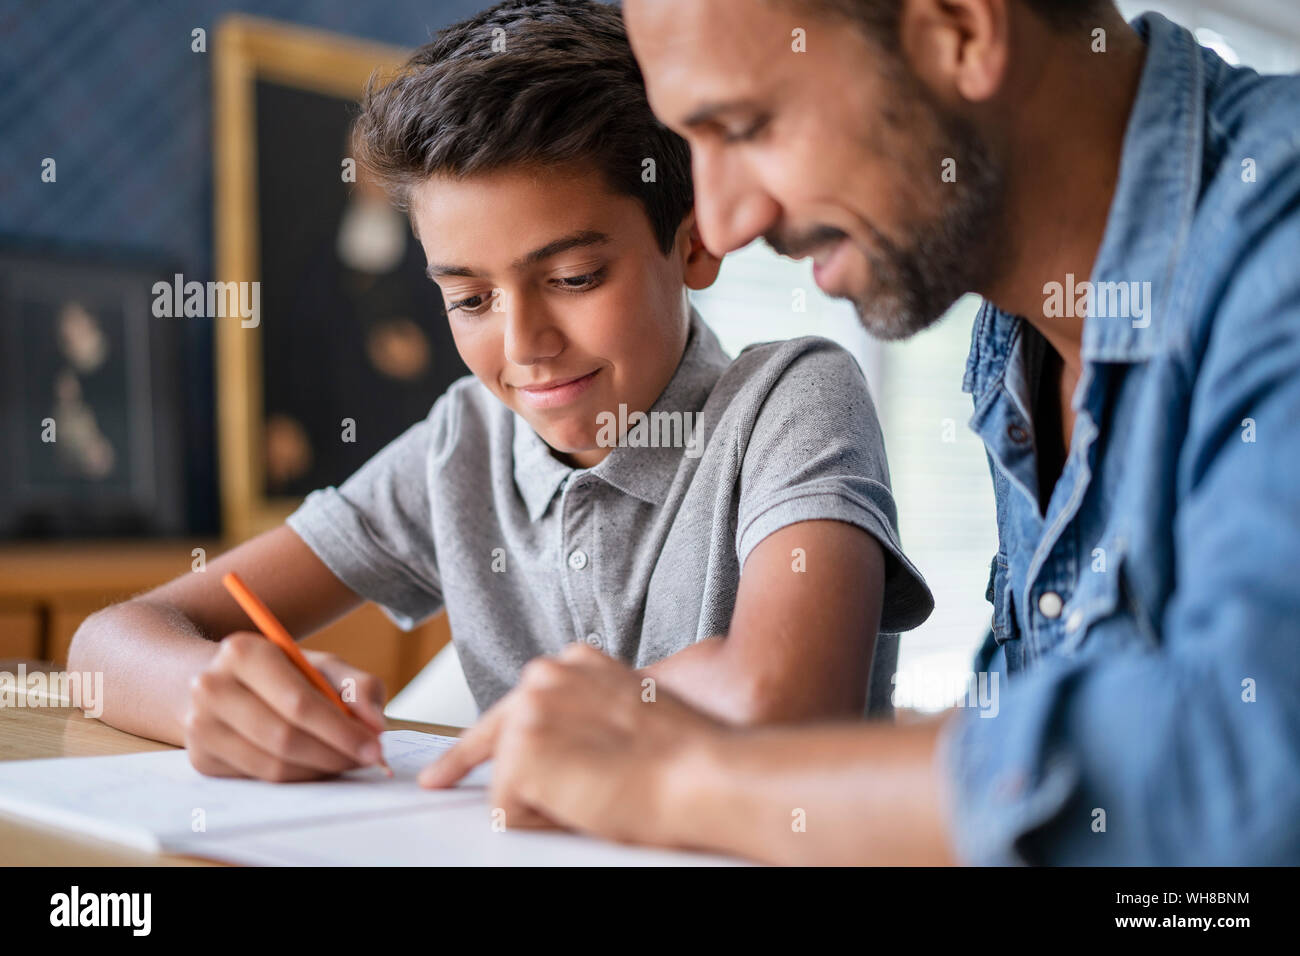 Smiling father helping son doing homework Stock Photo